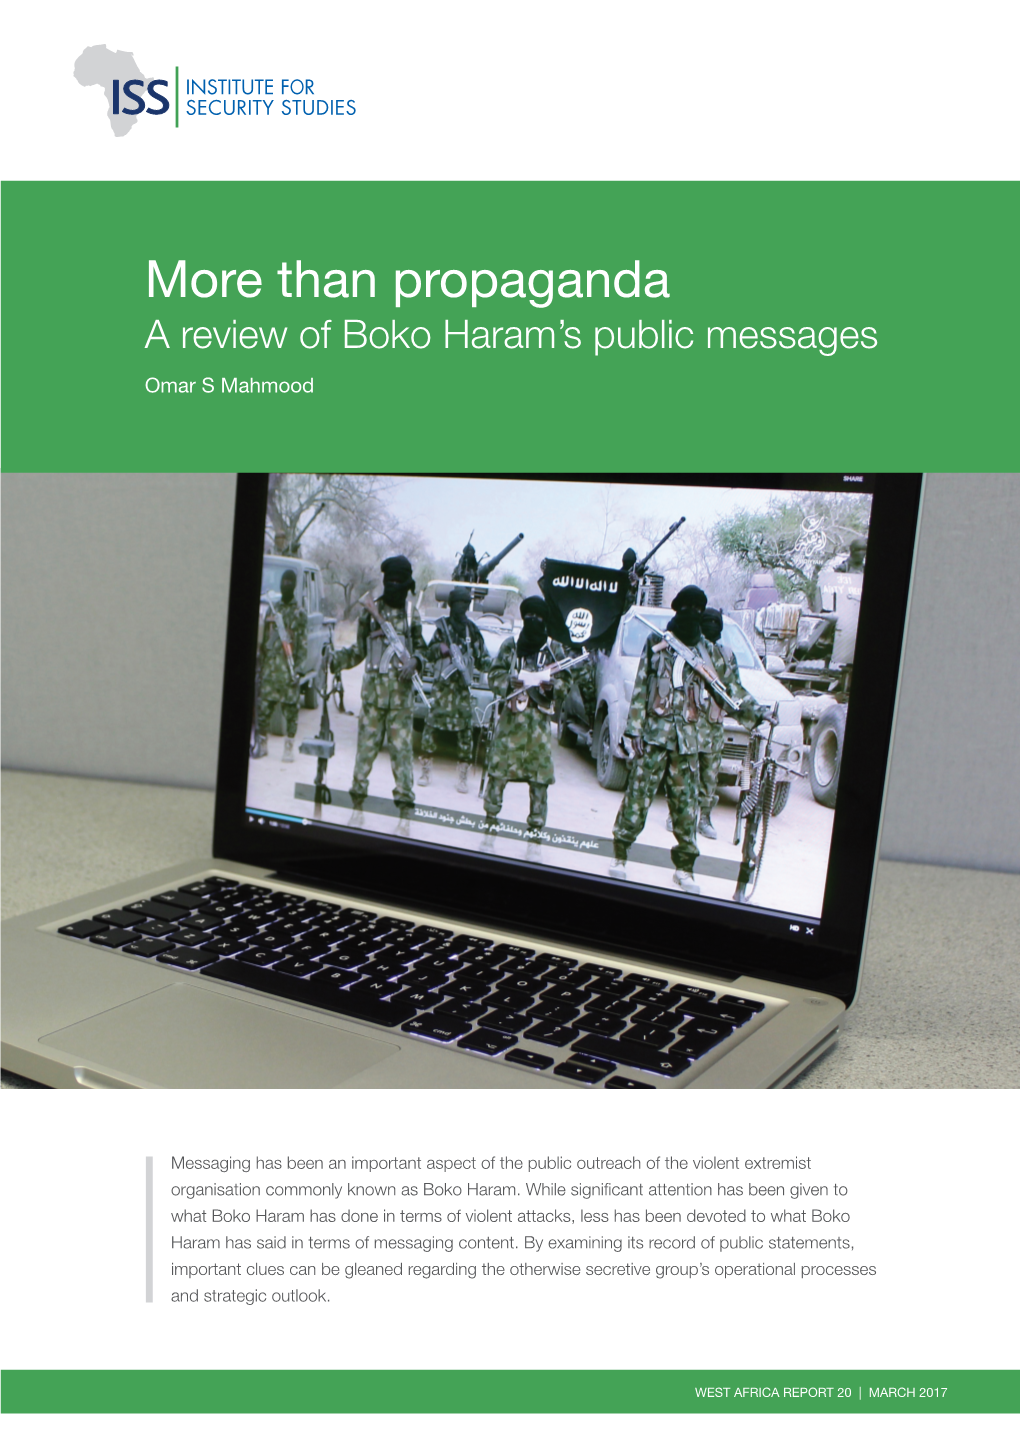 More Than Propaganda: a Review of Boko Haram's Public Messages